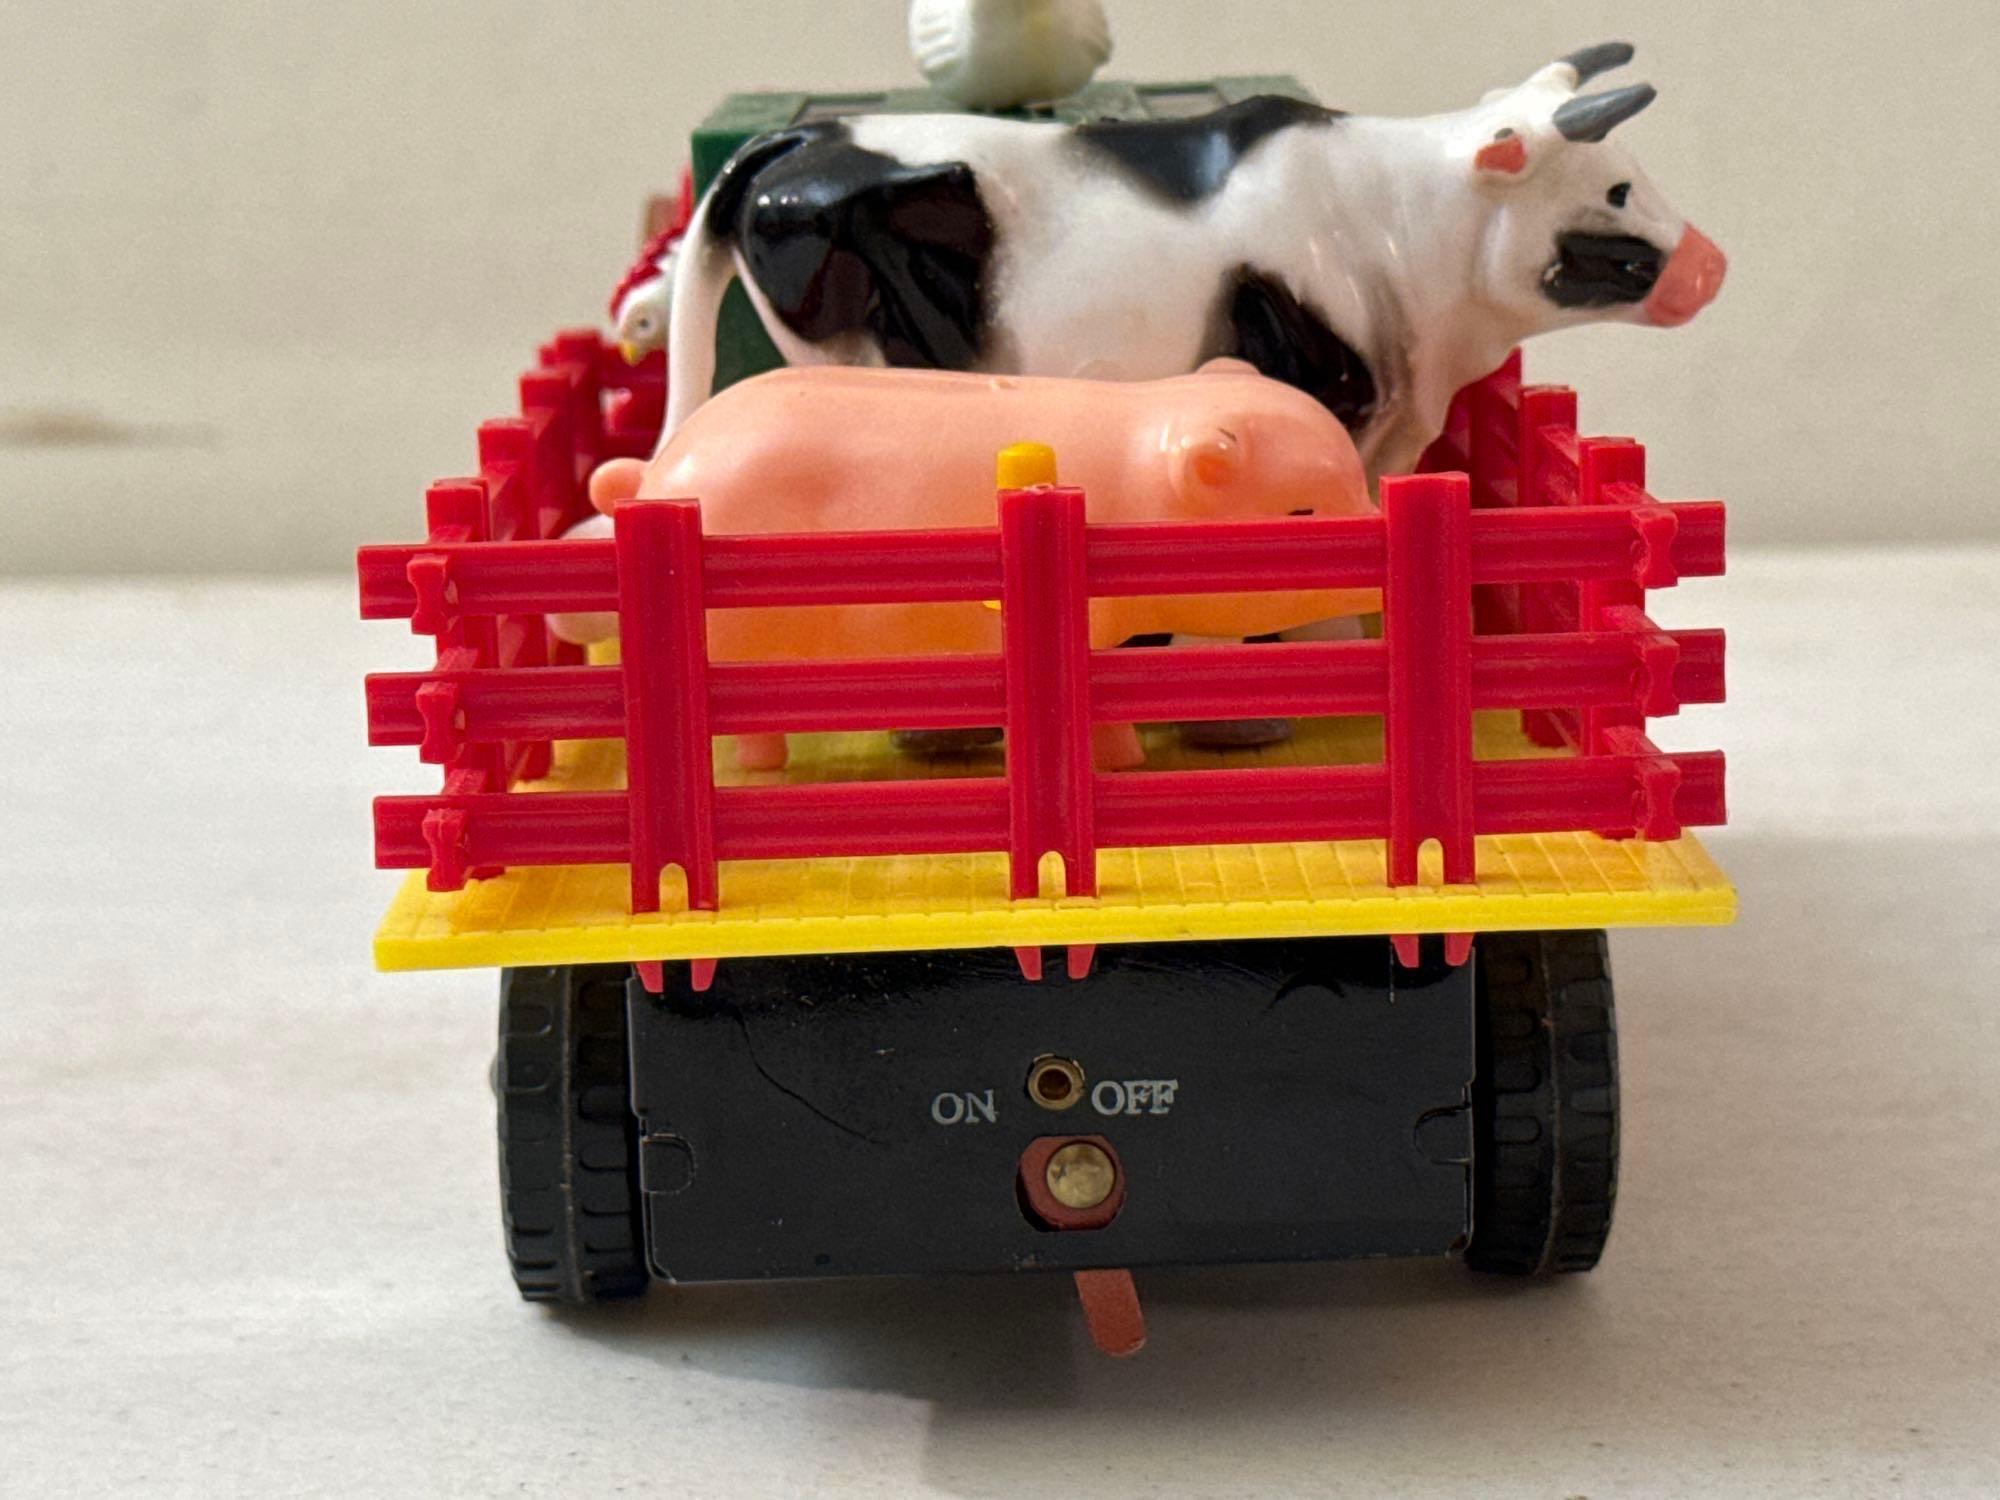 Vintage Marx Battery Operated Farm Truck